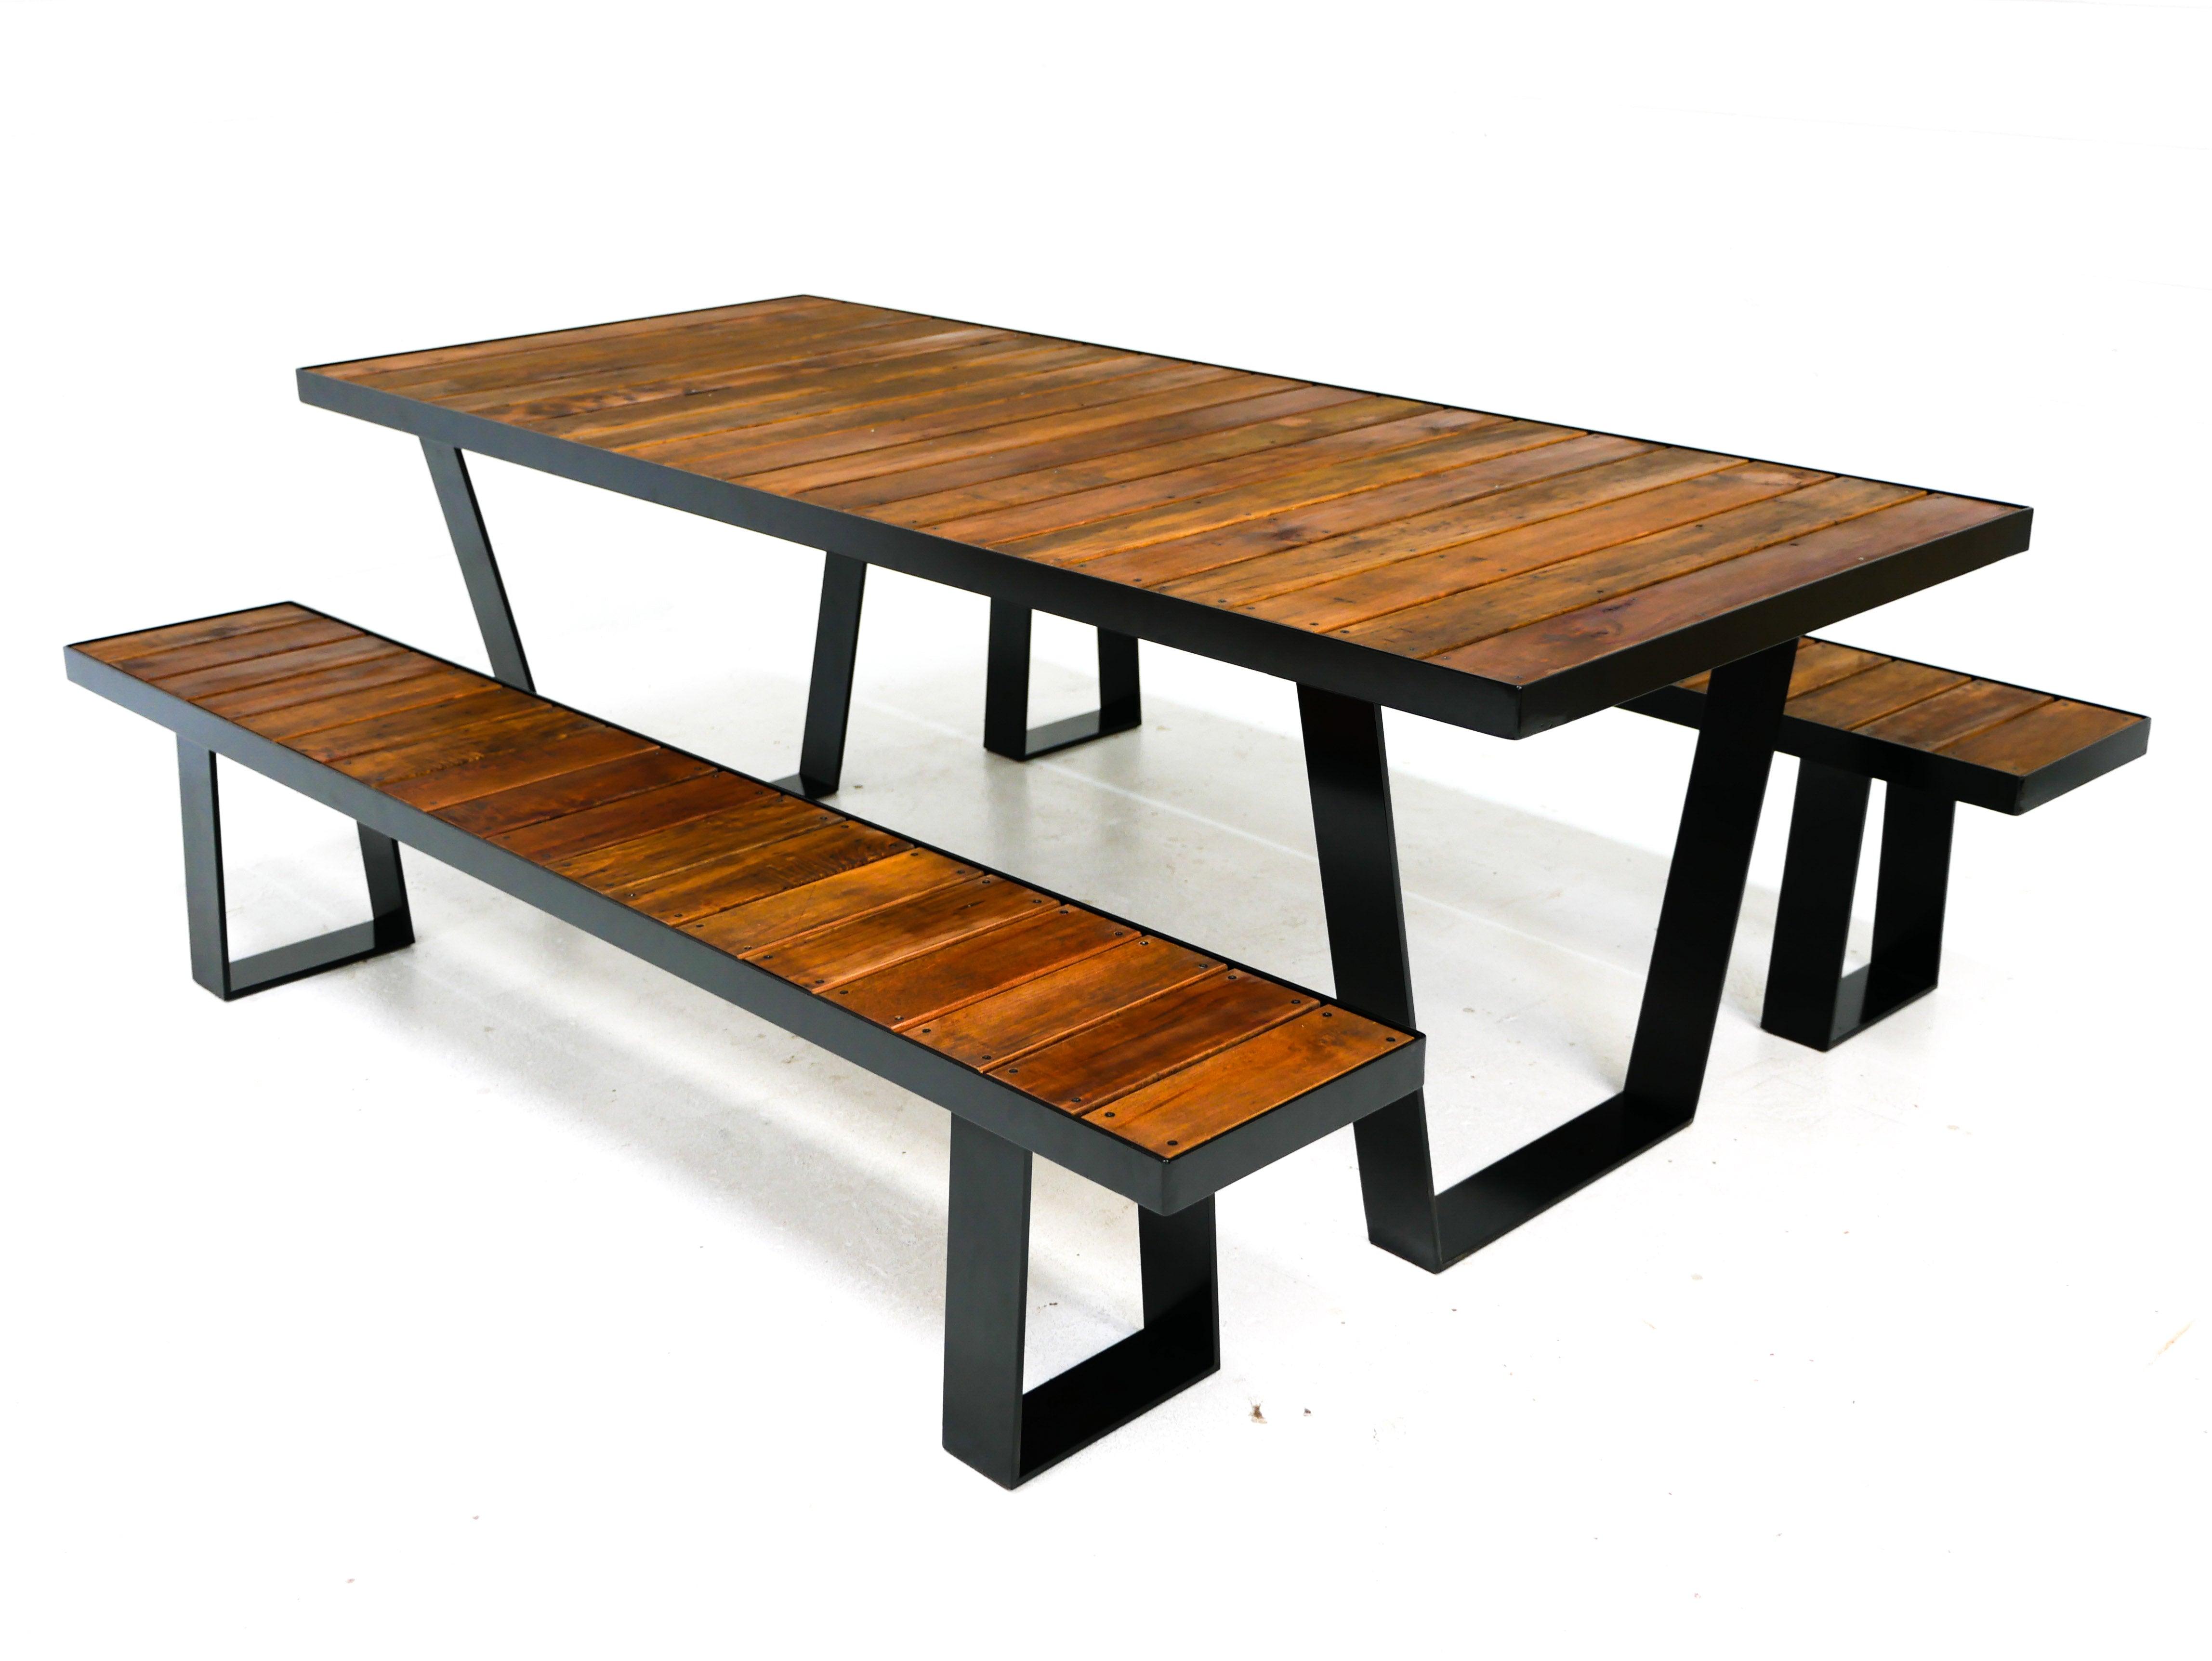 Exterior Dining Table - Angled Frame - Innate Furniture